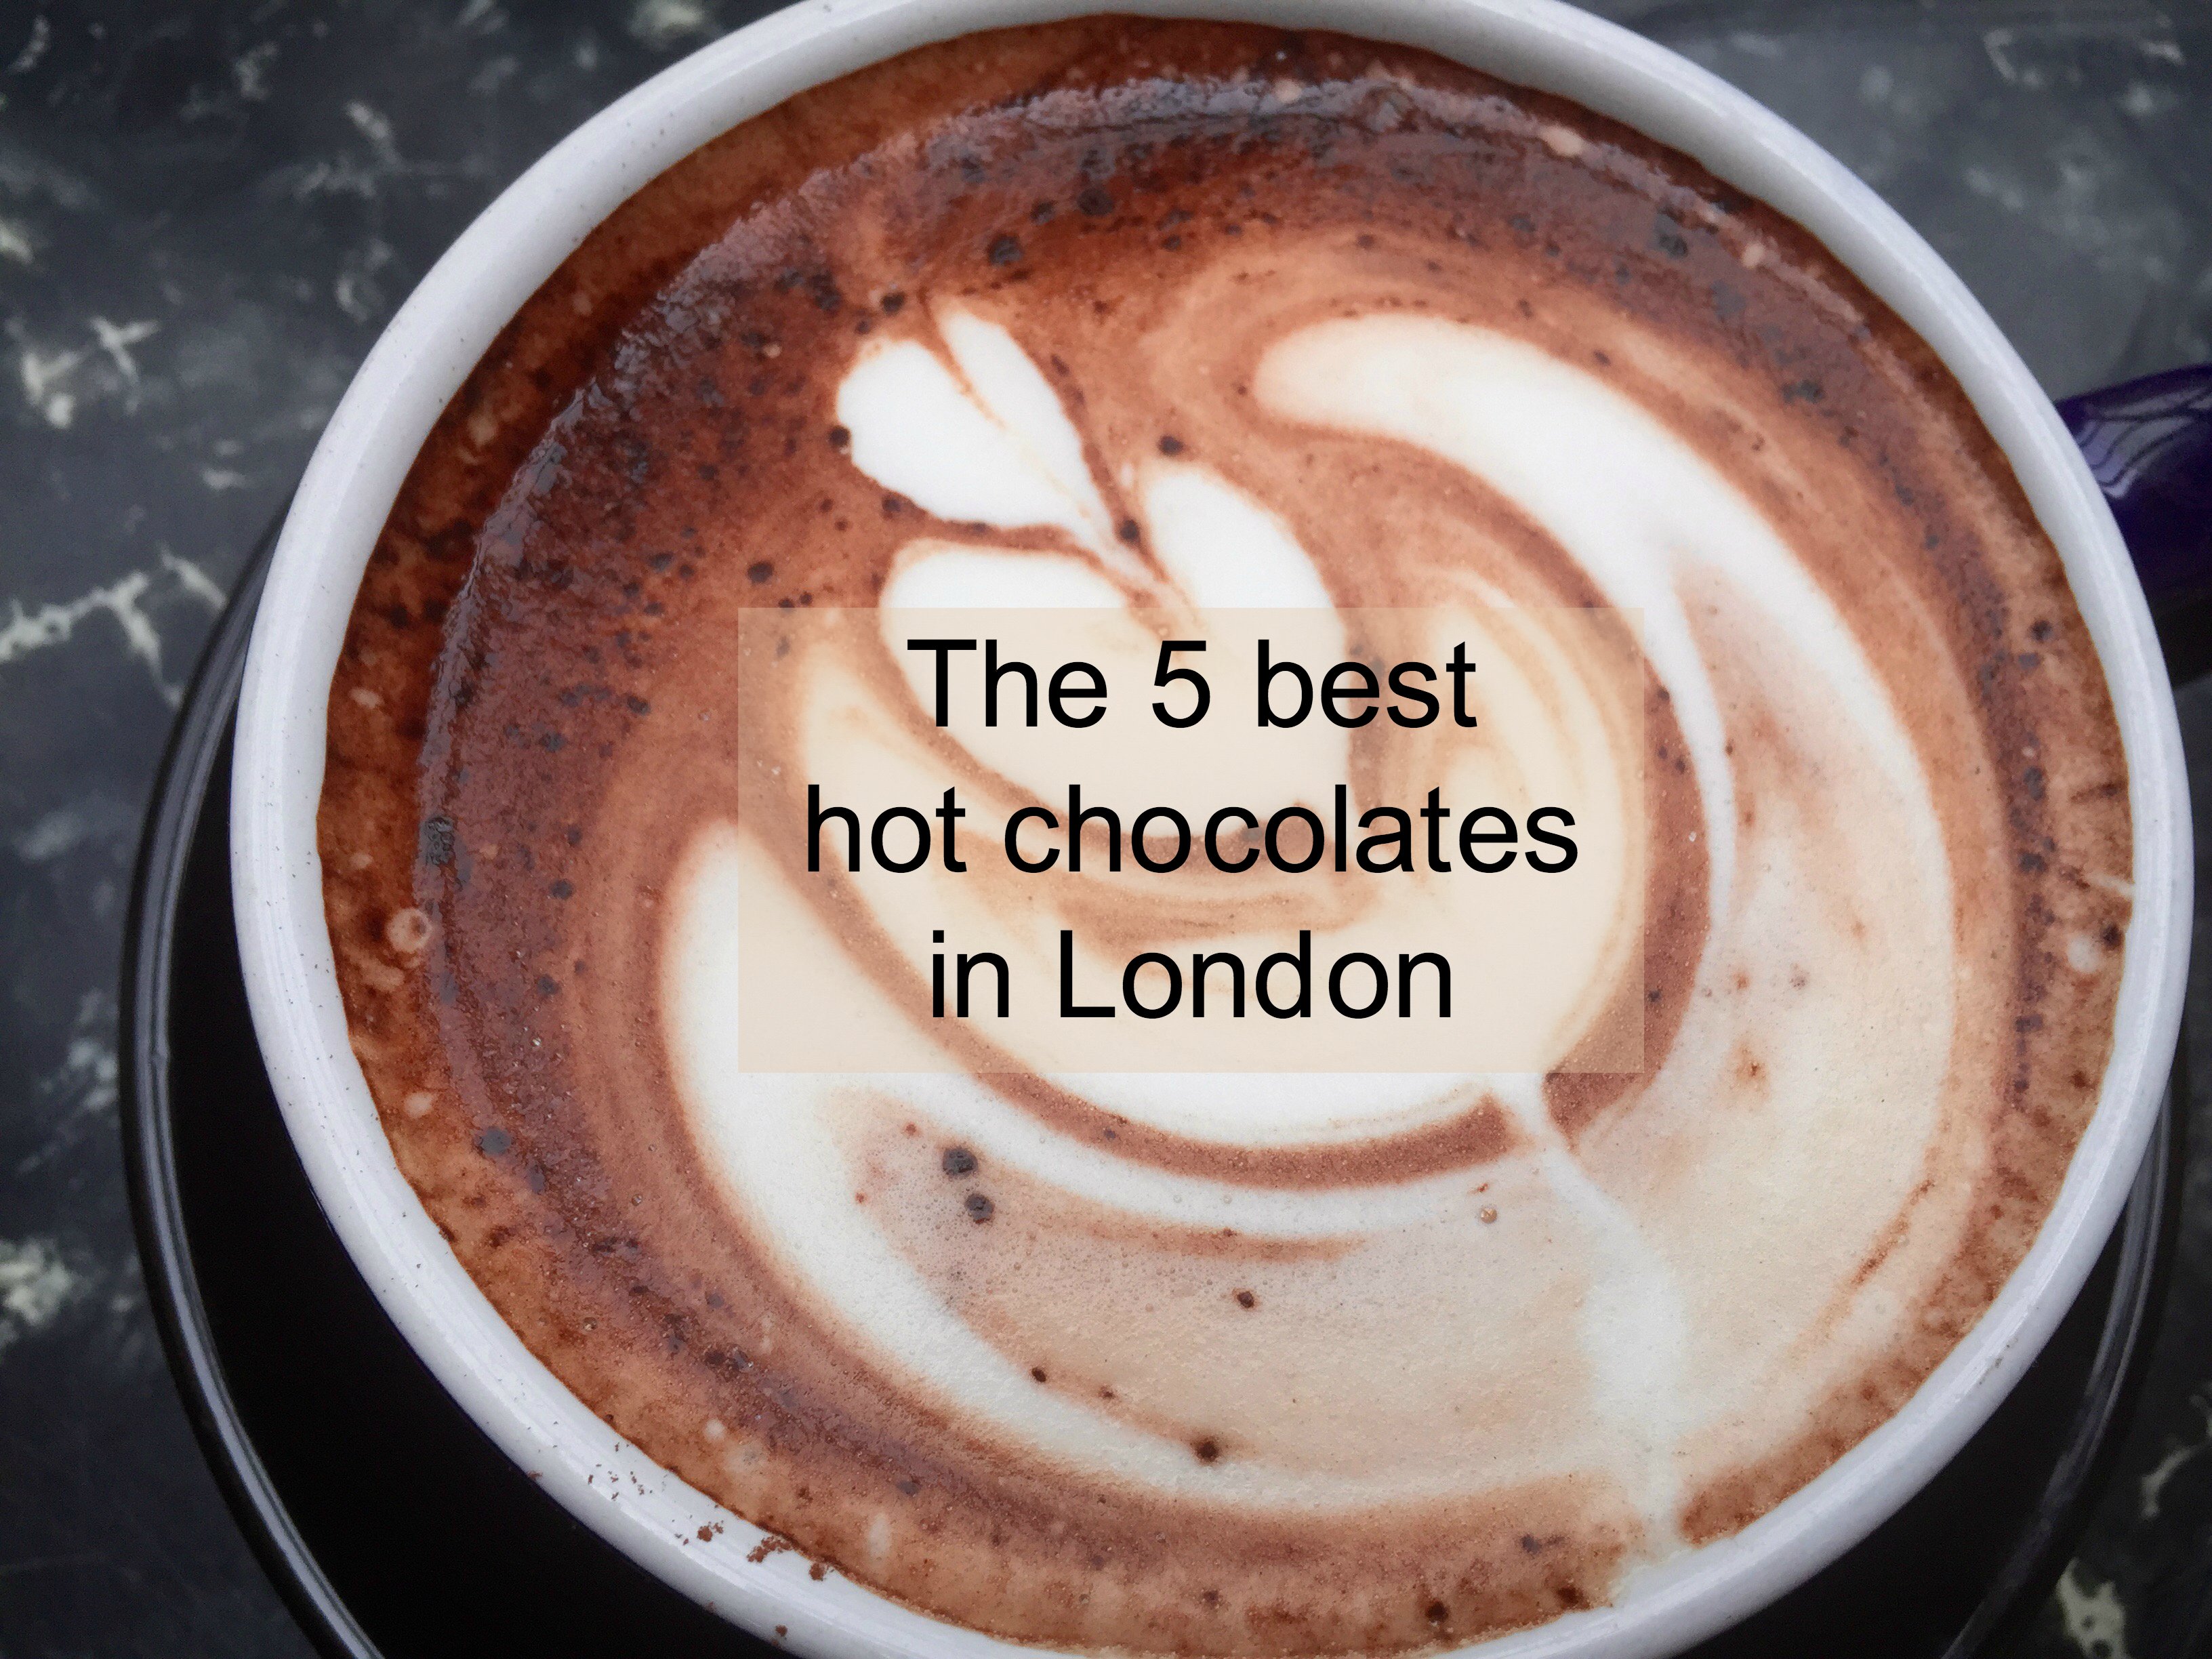 The 5 best hot chocolates in London